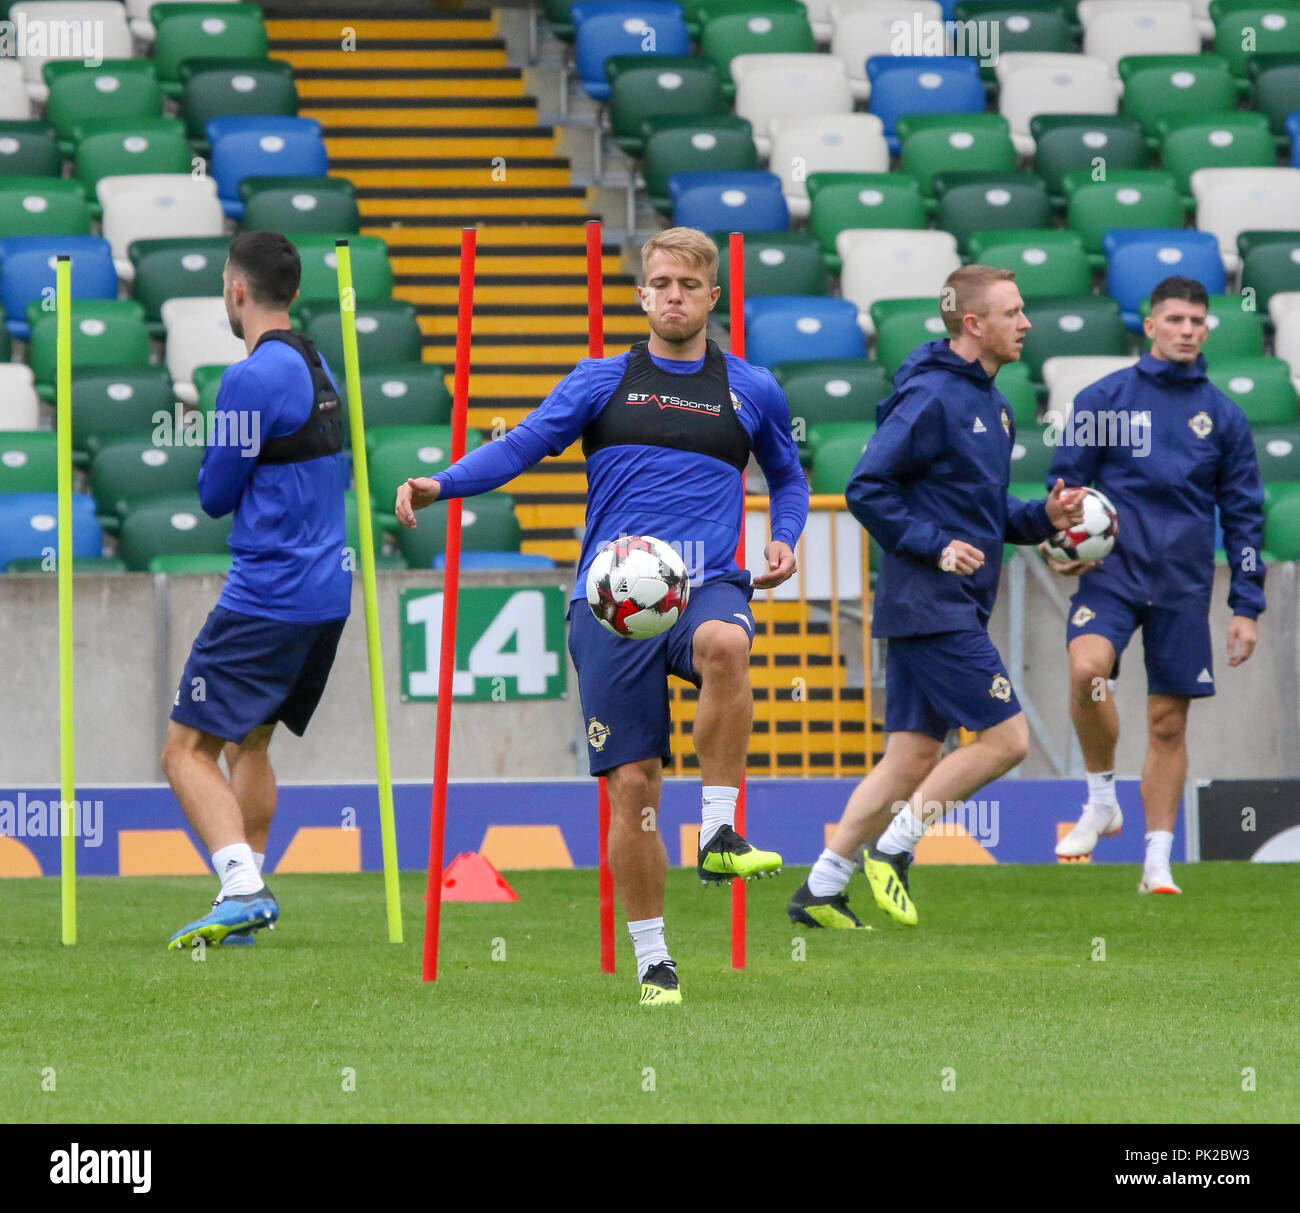 Windsor Park, Belfast, Northern Ireland. 10 September 2018. After Saturday's defeat in the UEFA Nations League, Northern Ireland returned to training this morning at Windsor Park. Tomorrow night they play Israel in a friendly international. Jamie Ward. Credit: David Hunter/Alamy Live News. Stock Photo